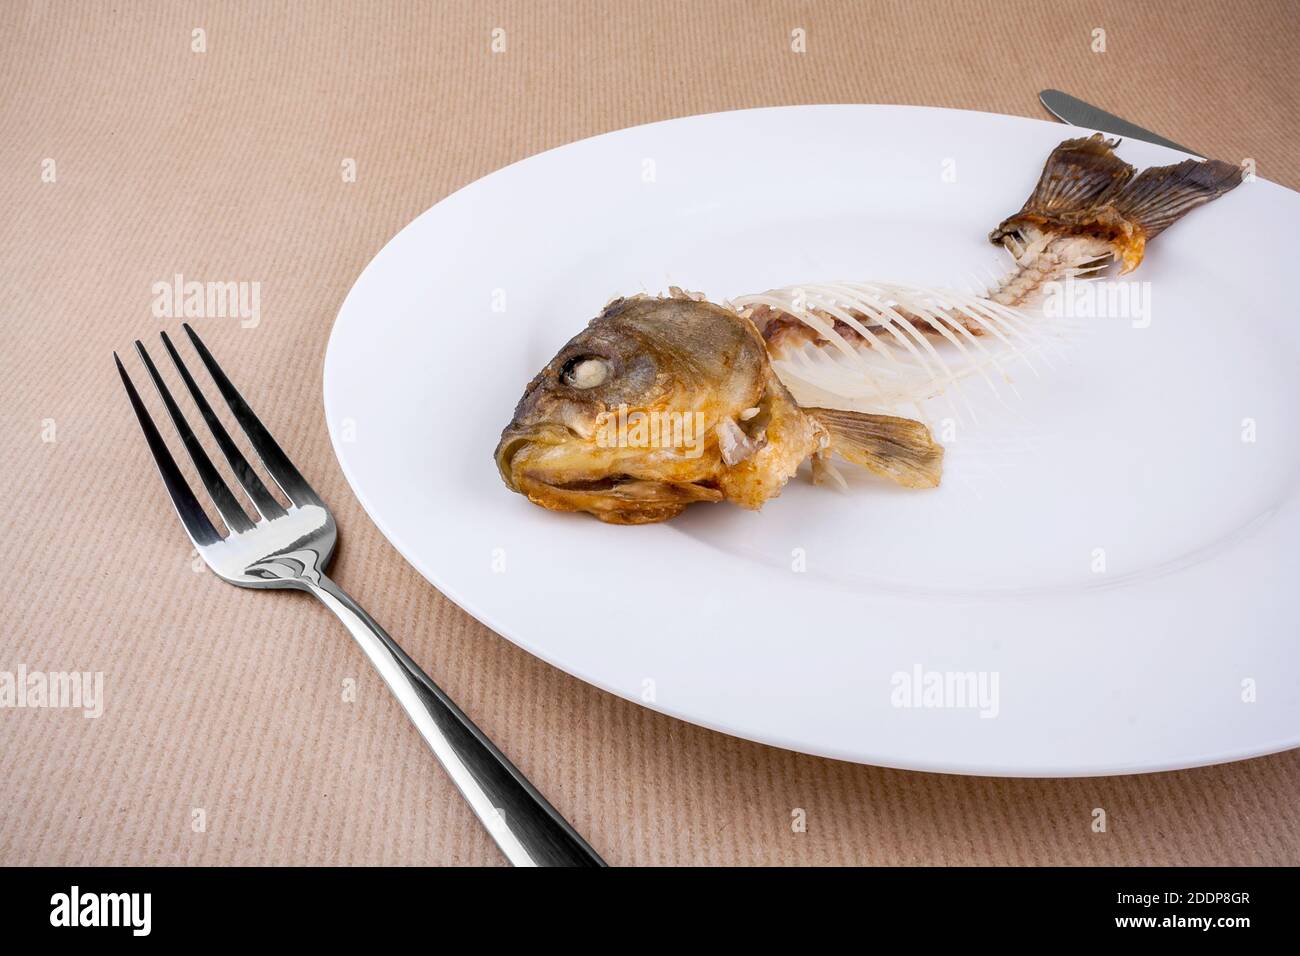 Complete bone of whole fish on plate, abstract, top view Stock Photo